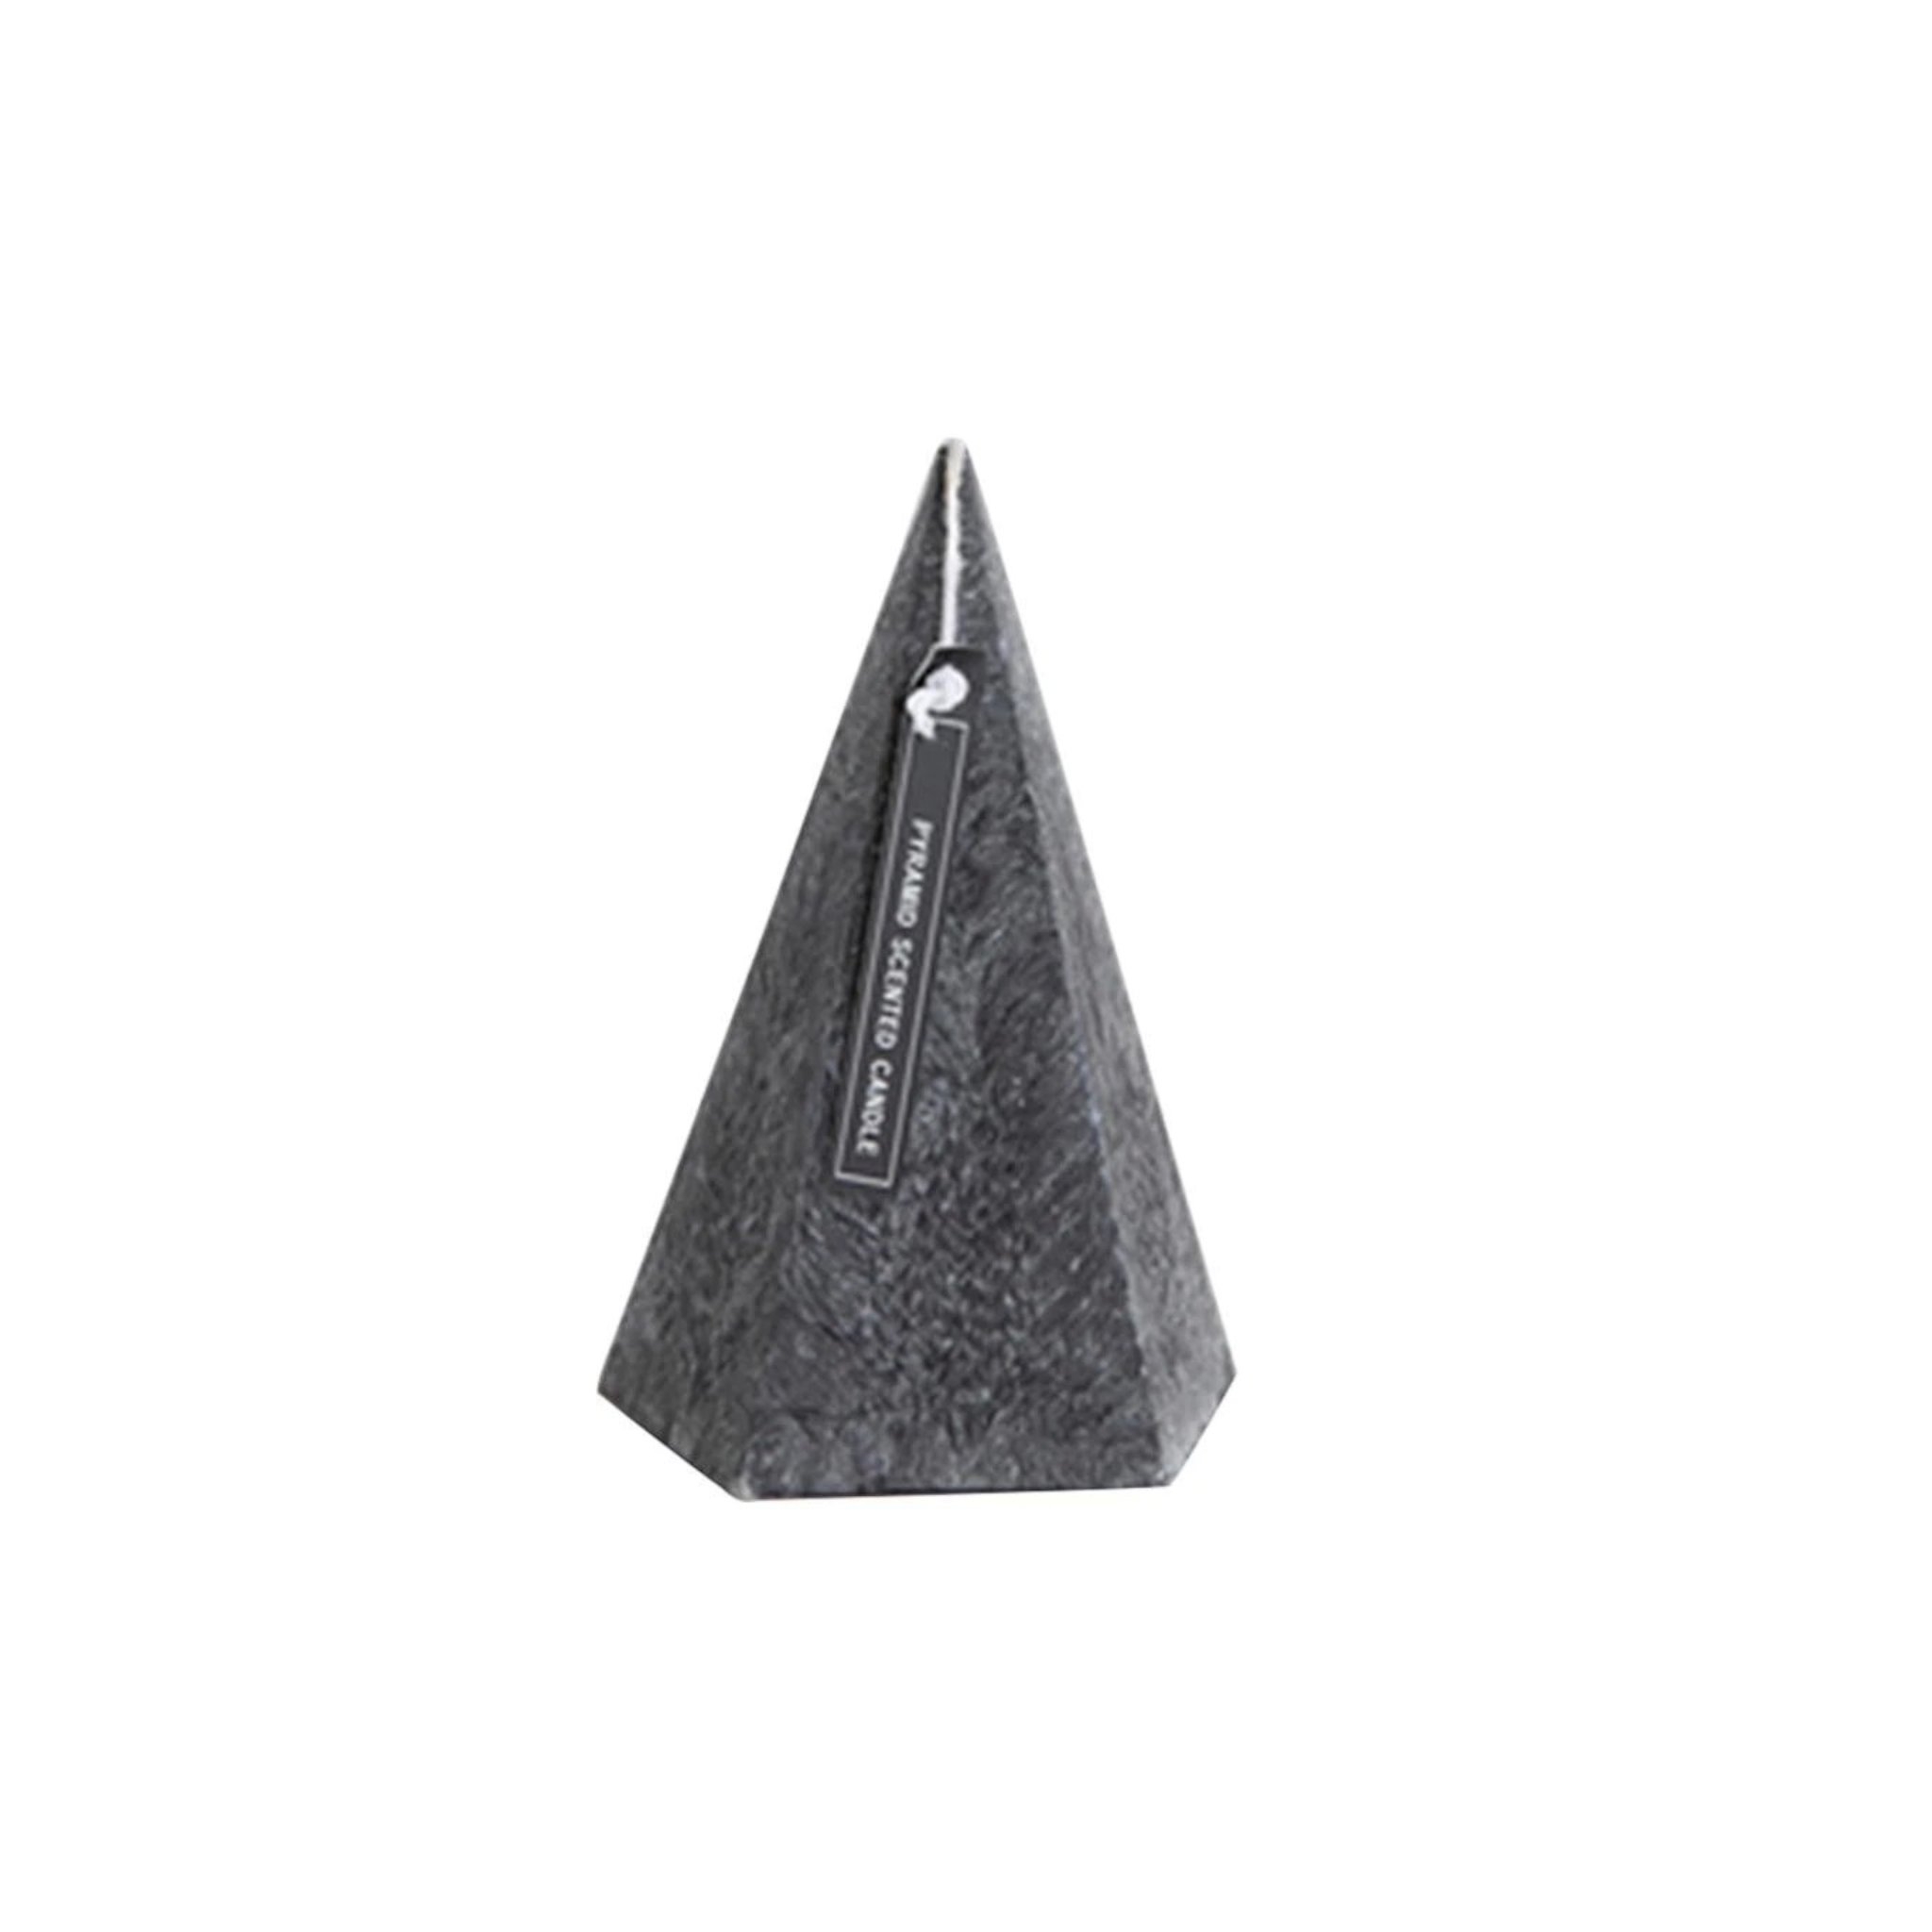 Pyramid Candles – Thyme & Sage Scent – Black / Grey / White – Wax – The Trouvailles